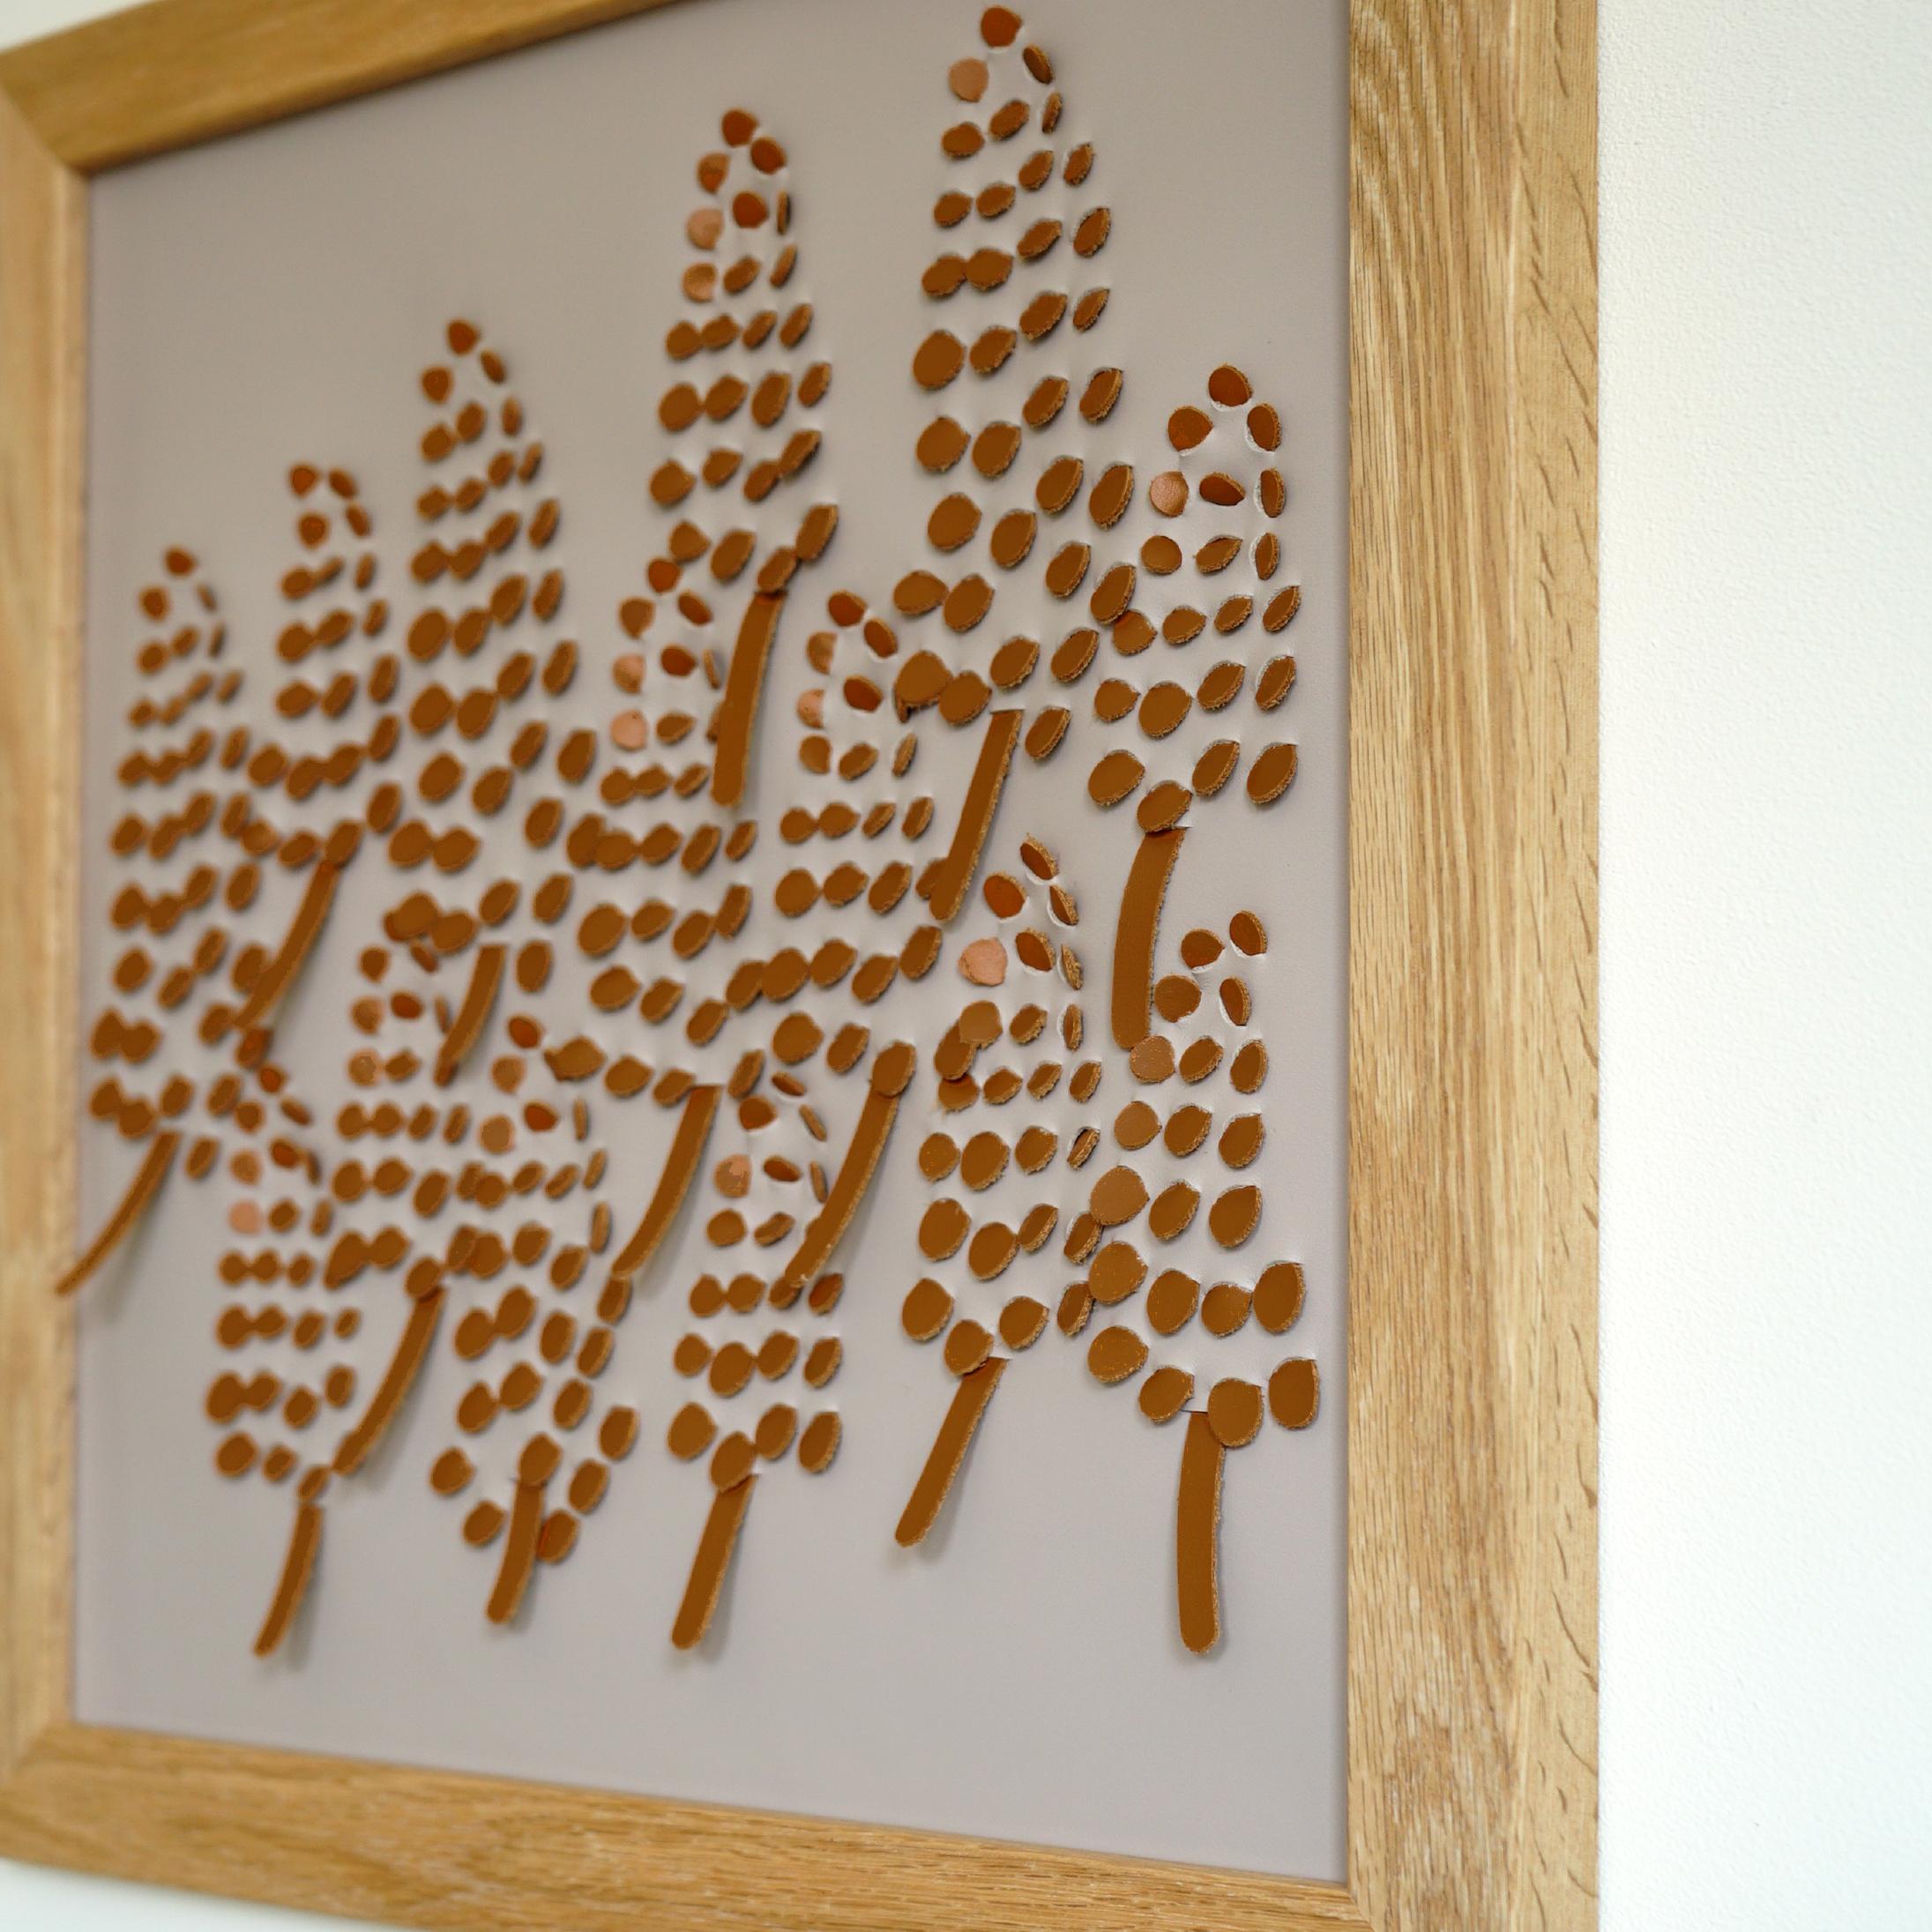 British Grape Hyacinth, a Piece of 3D Sculptural Egret and Tan Leather Wall Art For Sale